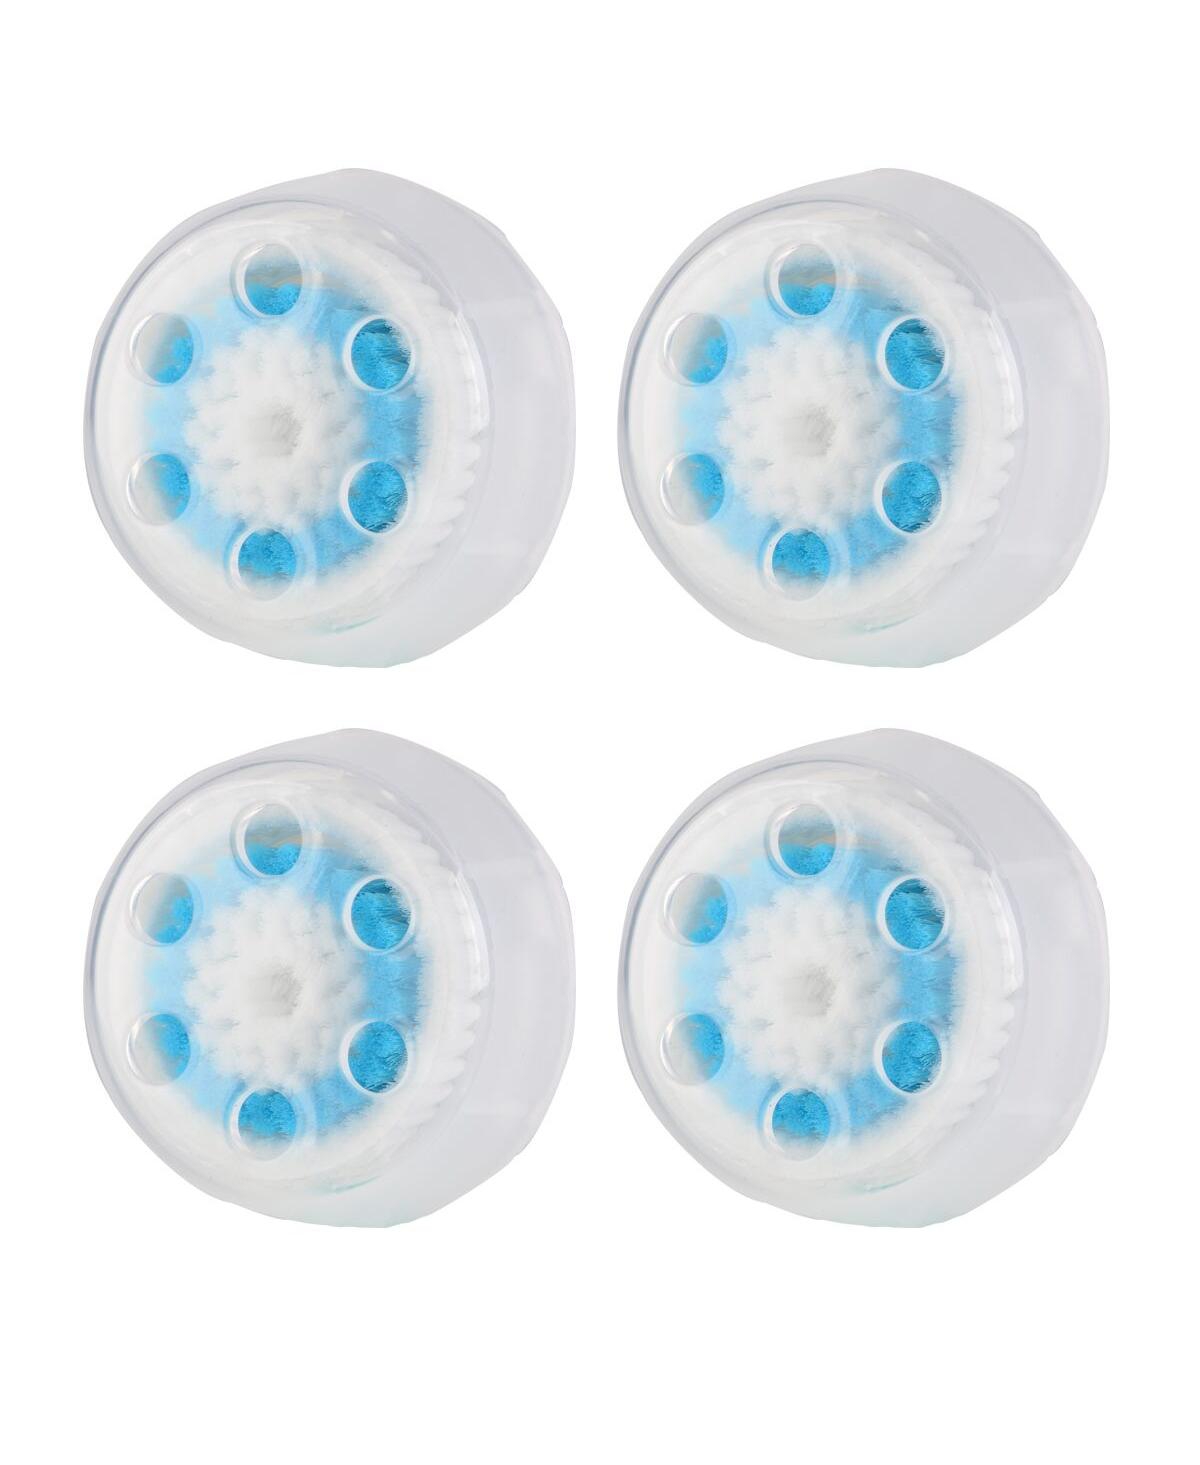 Deep Pore Facial Cleansing Brush Head Replacement compatible with Clarisonic 4 Pack - White